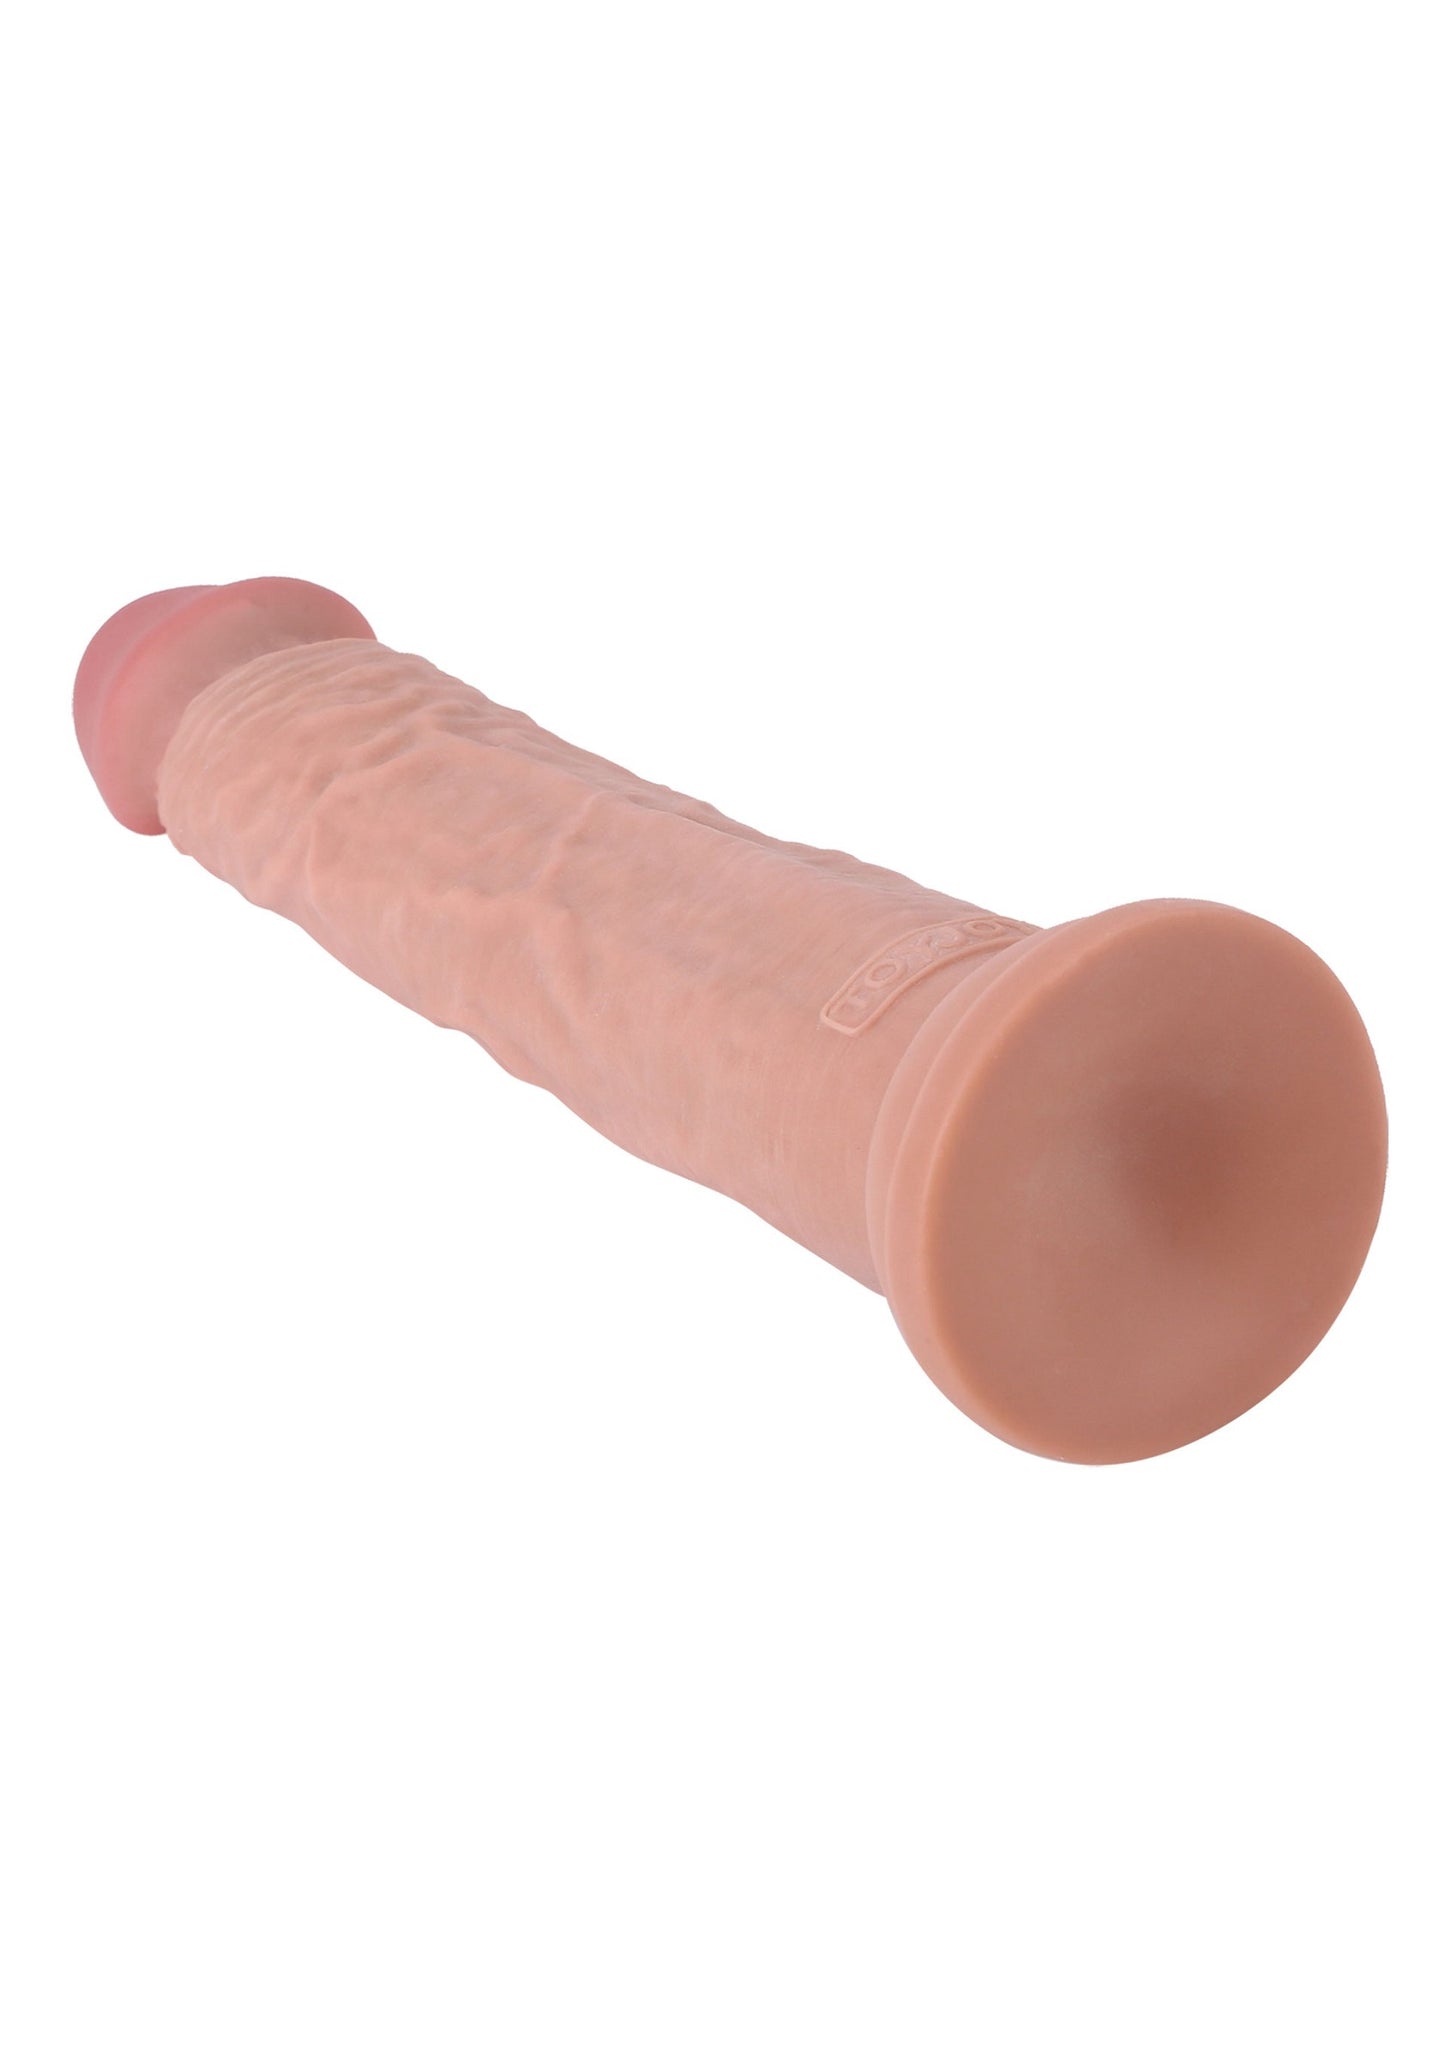 ToyJoy Get Real Deluxe Dual Density Dong 14' SKIN - 1